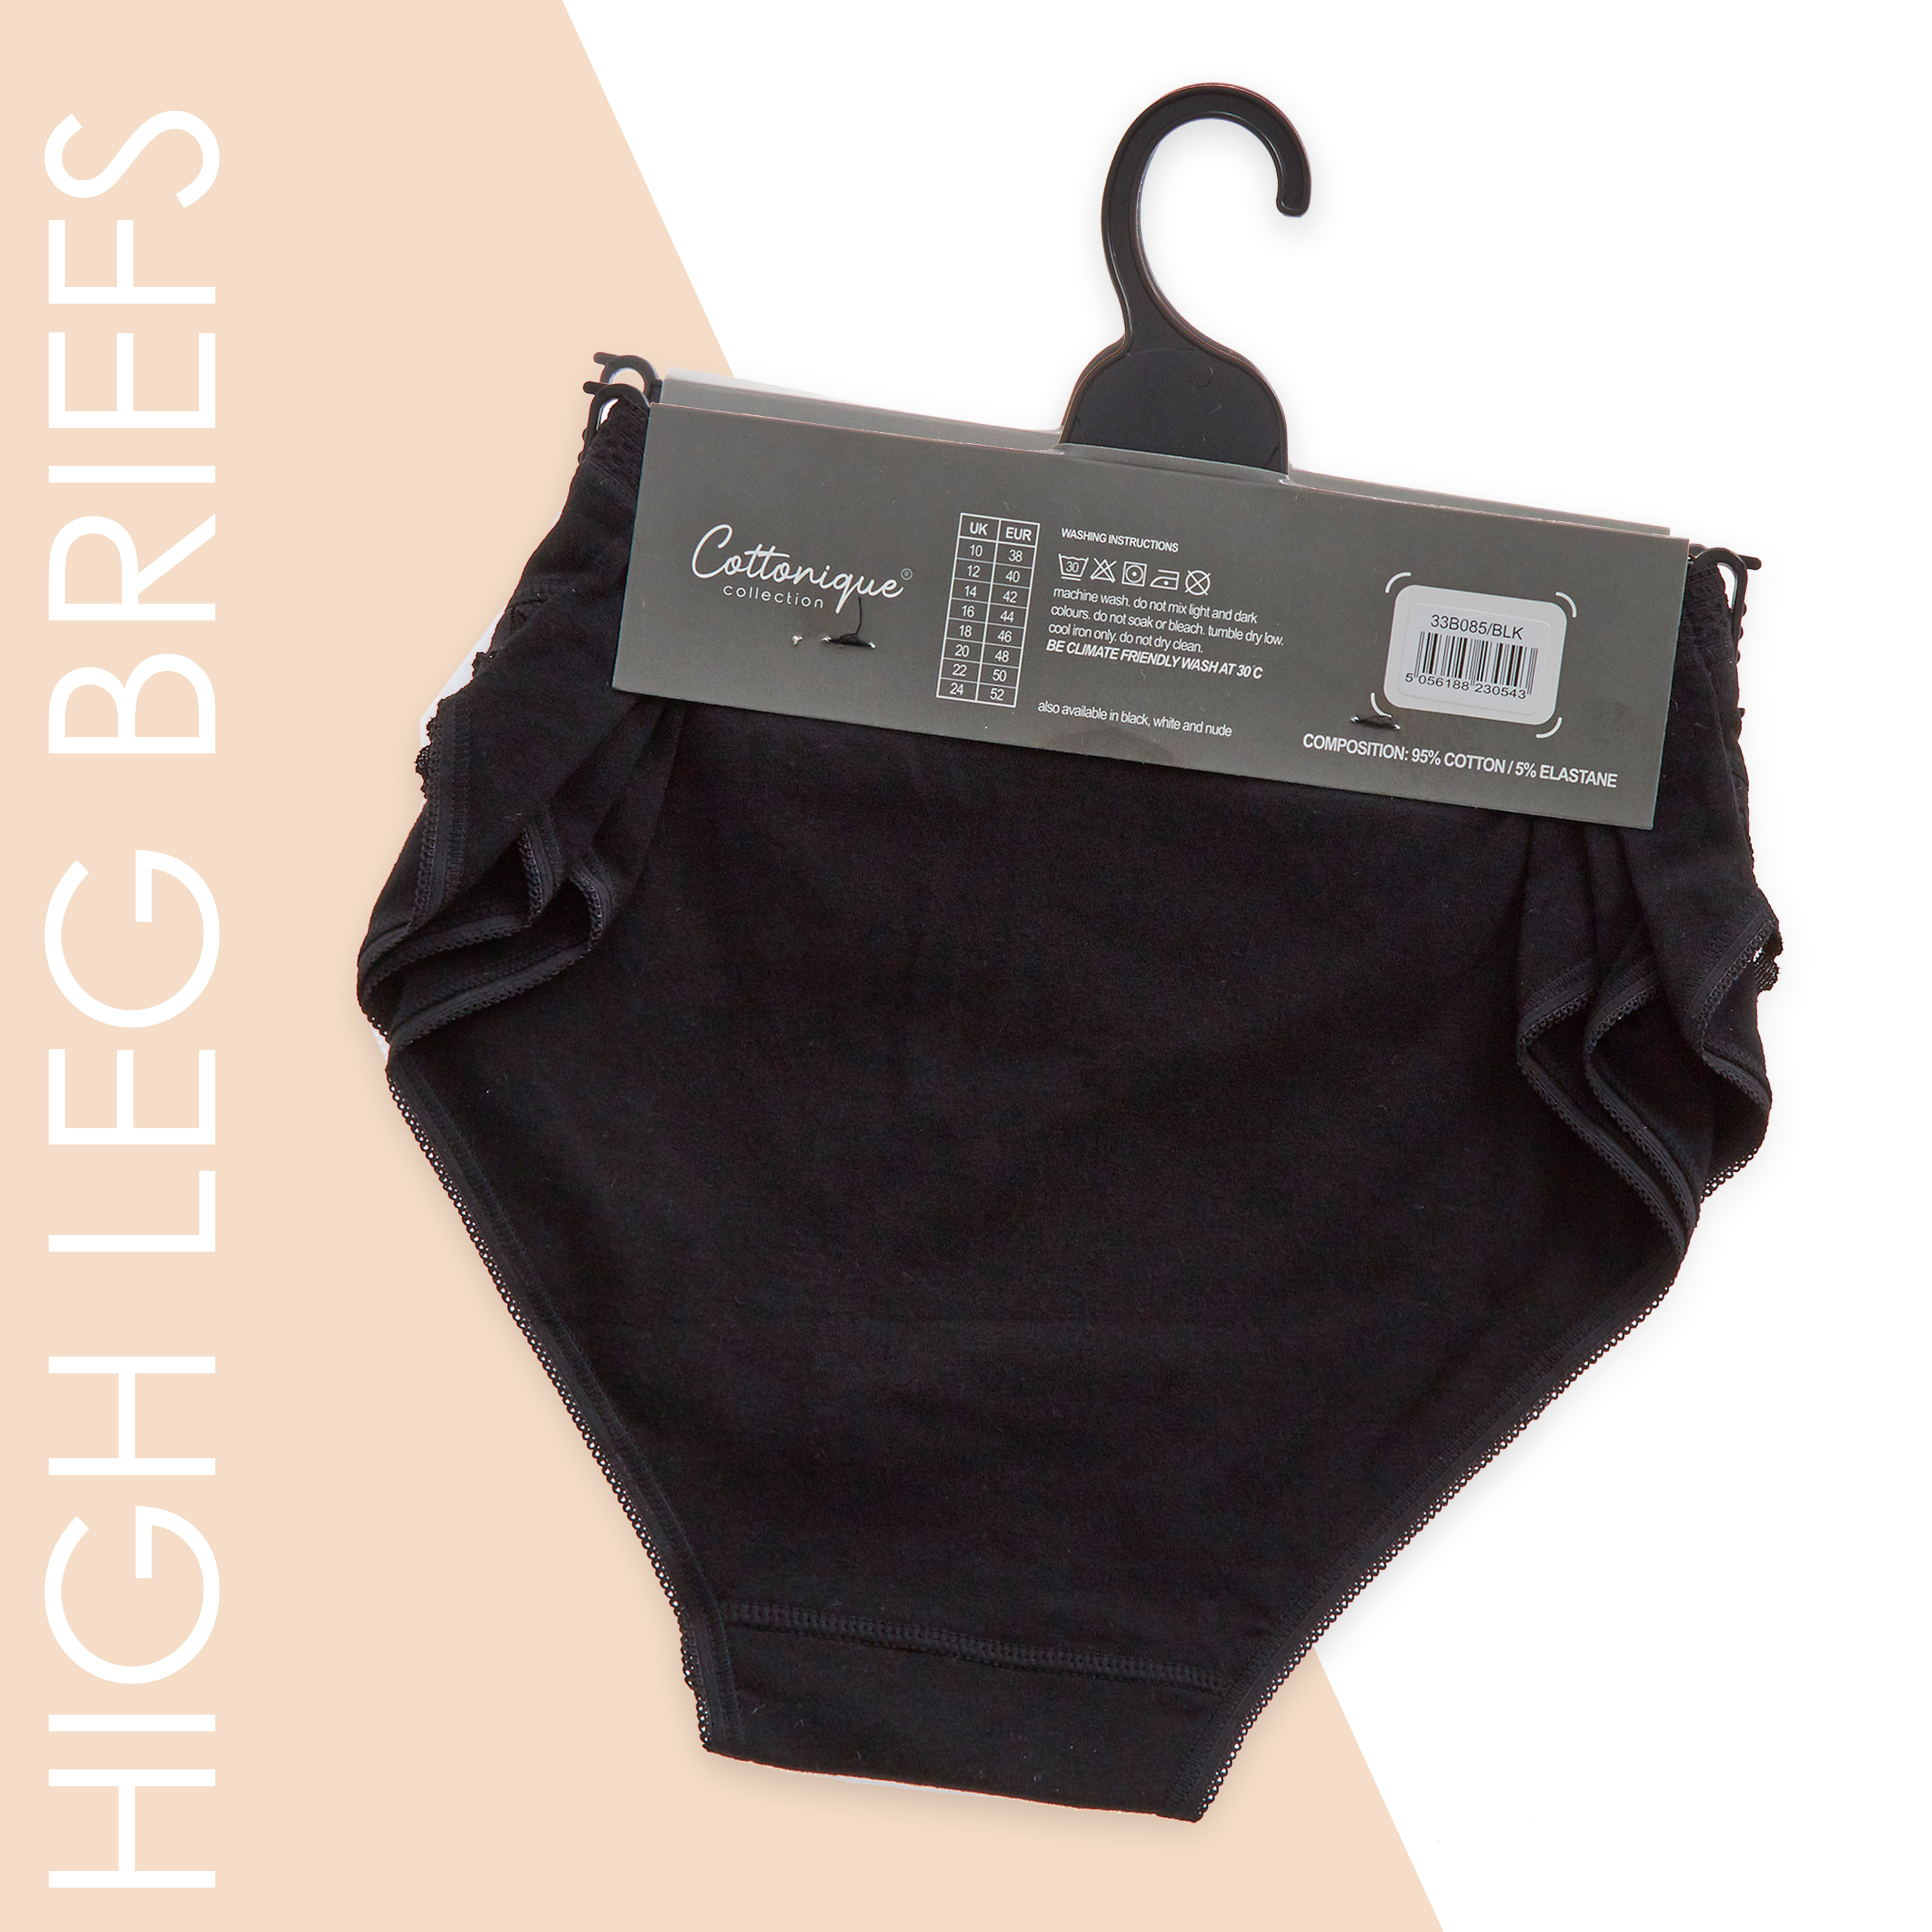 Buy Core High-Leg Briefs, Fast Delivery